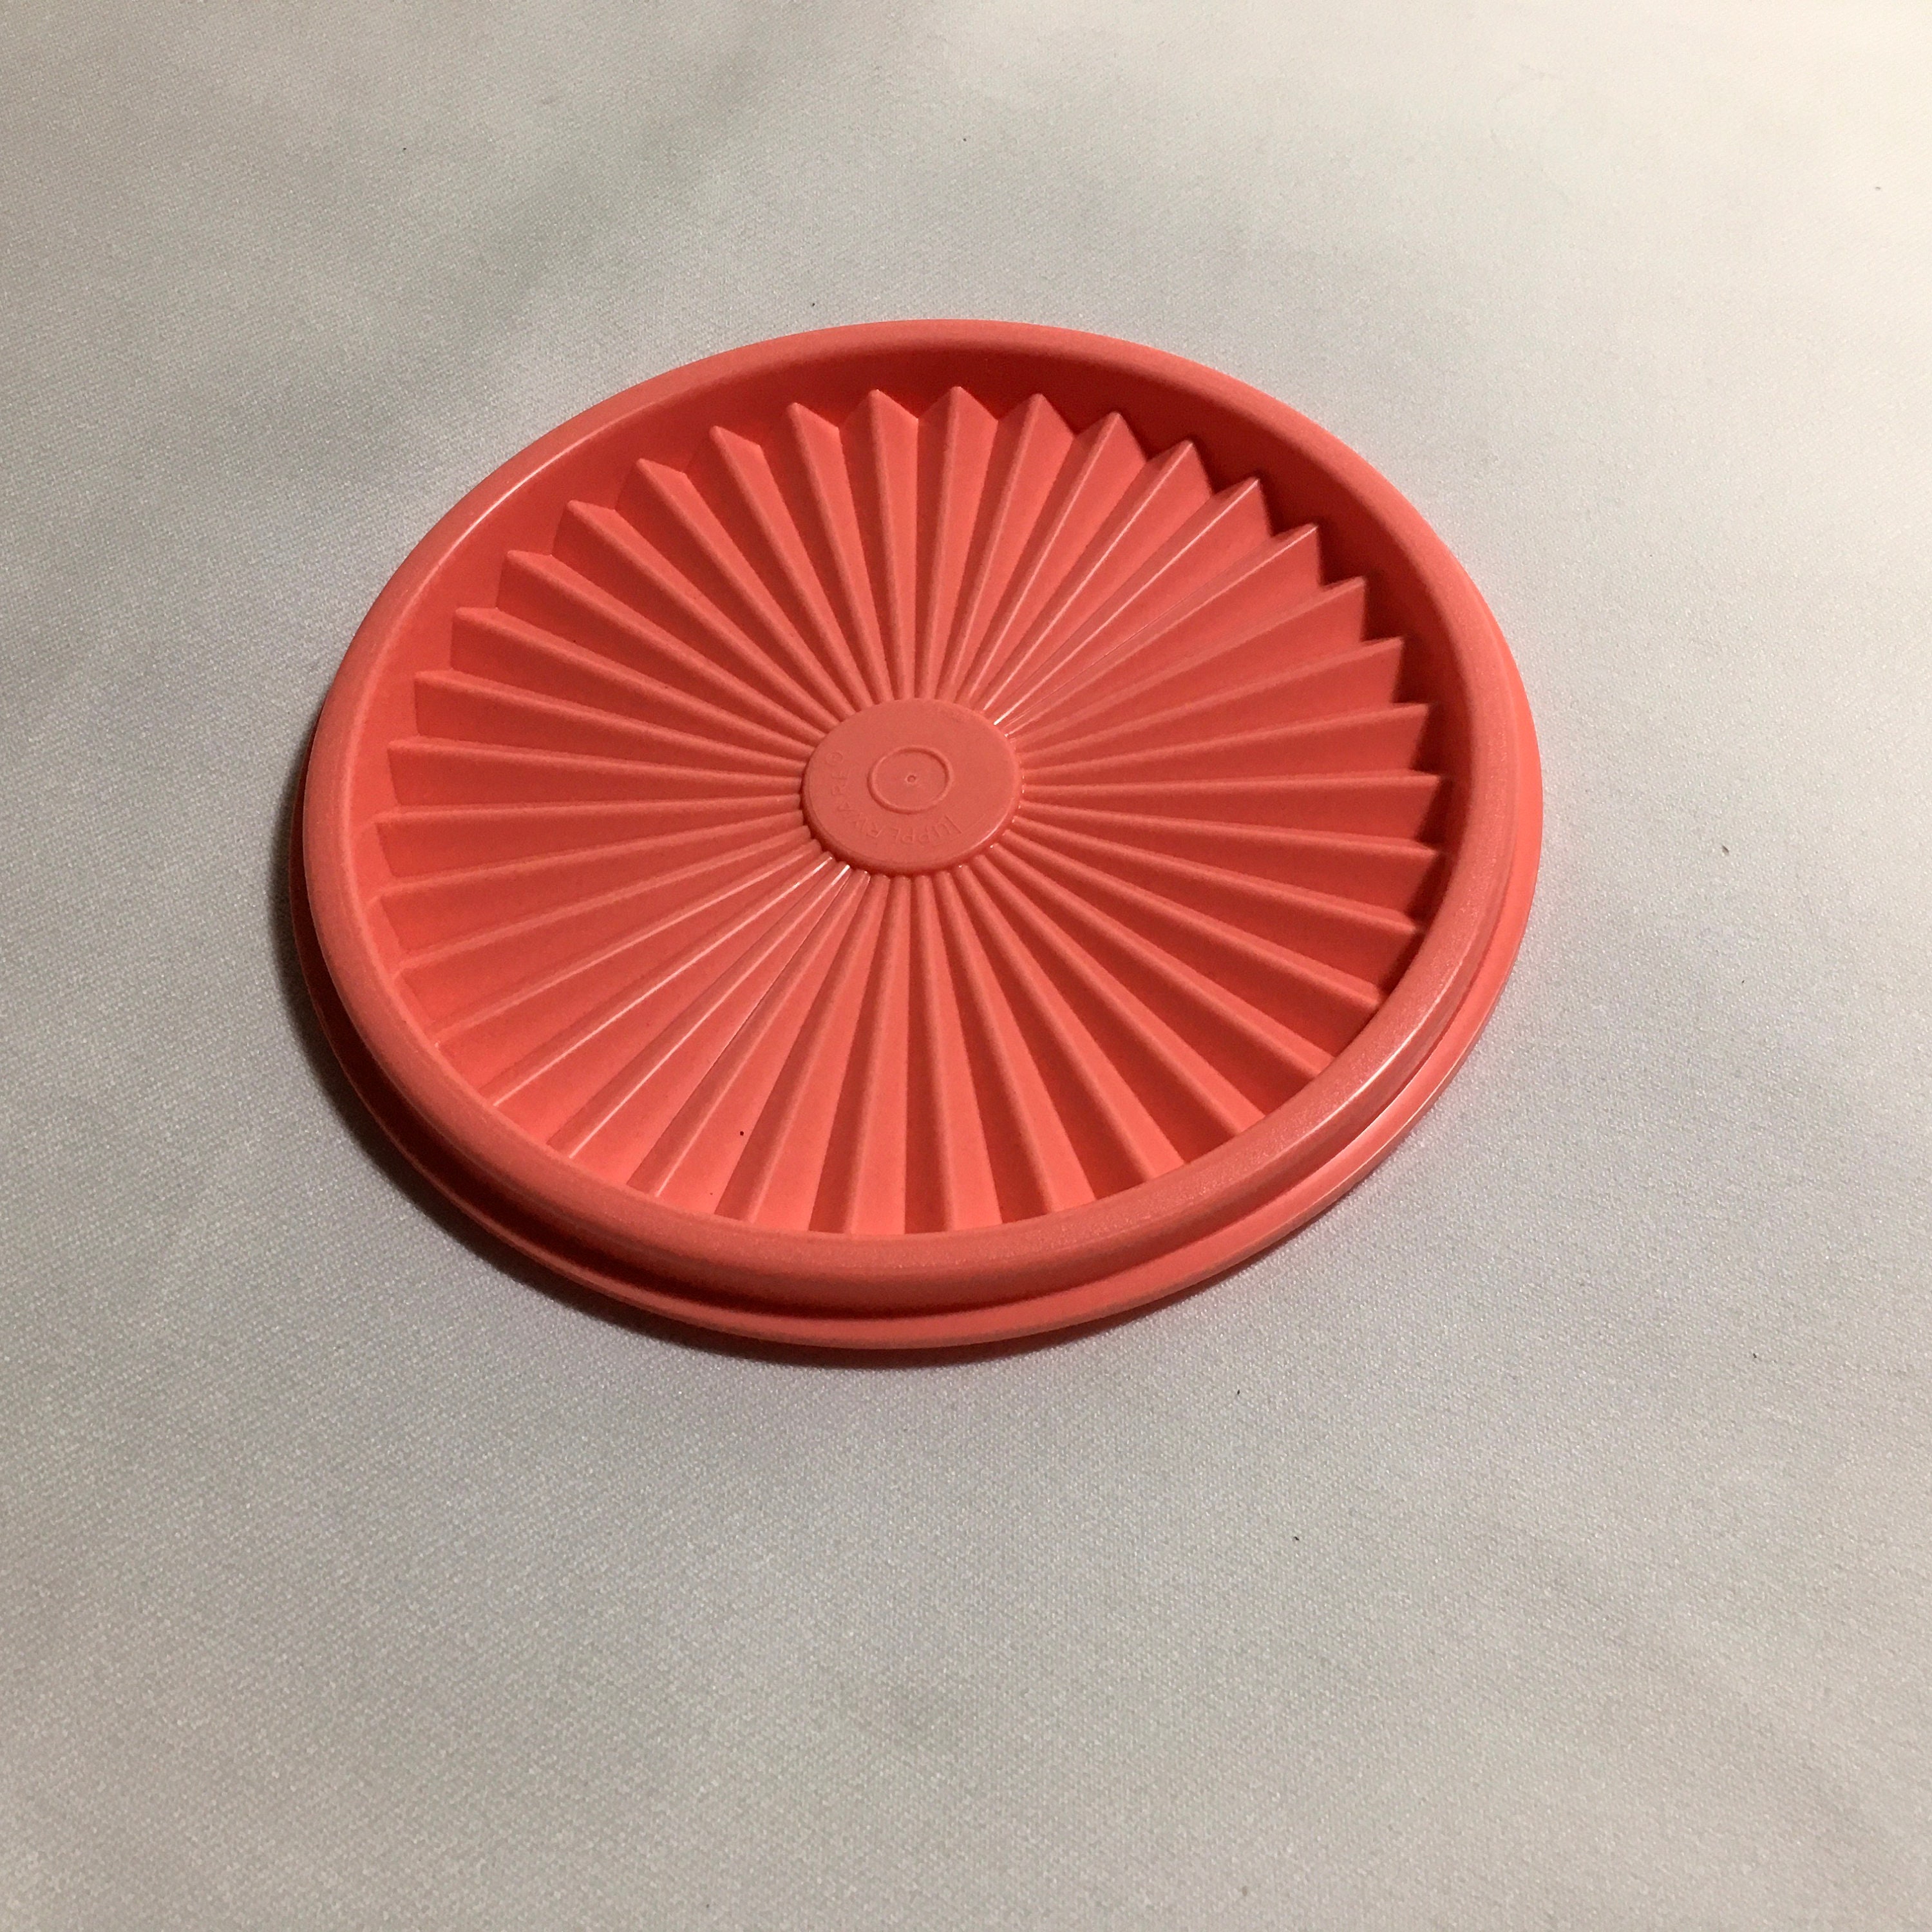 Snapware Airtight Replacement Lid 1/2-Cup Red Gasket Cover for